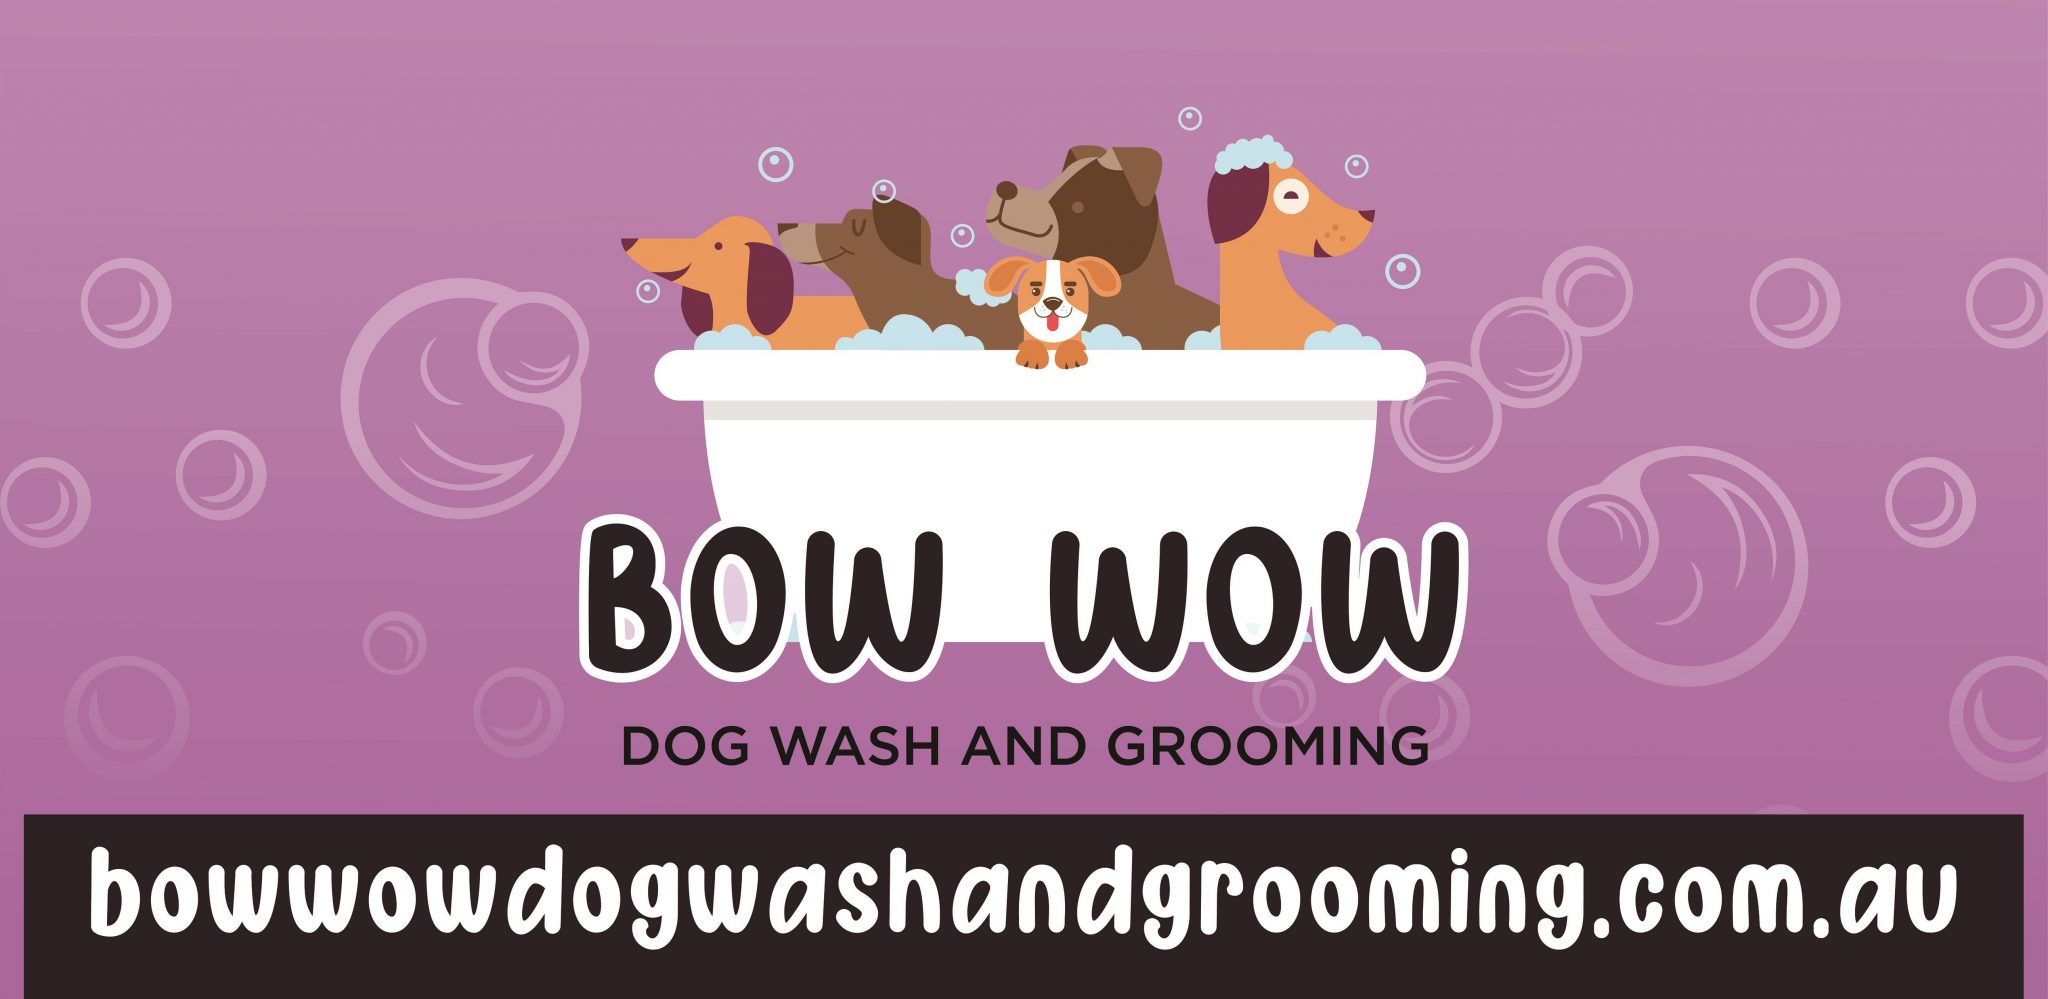 download bow wow dog grooming